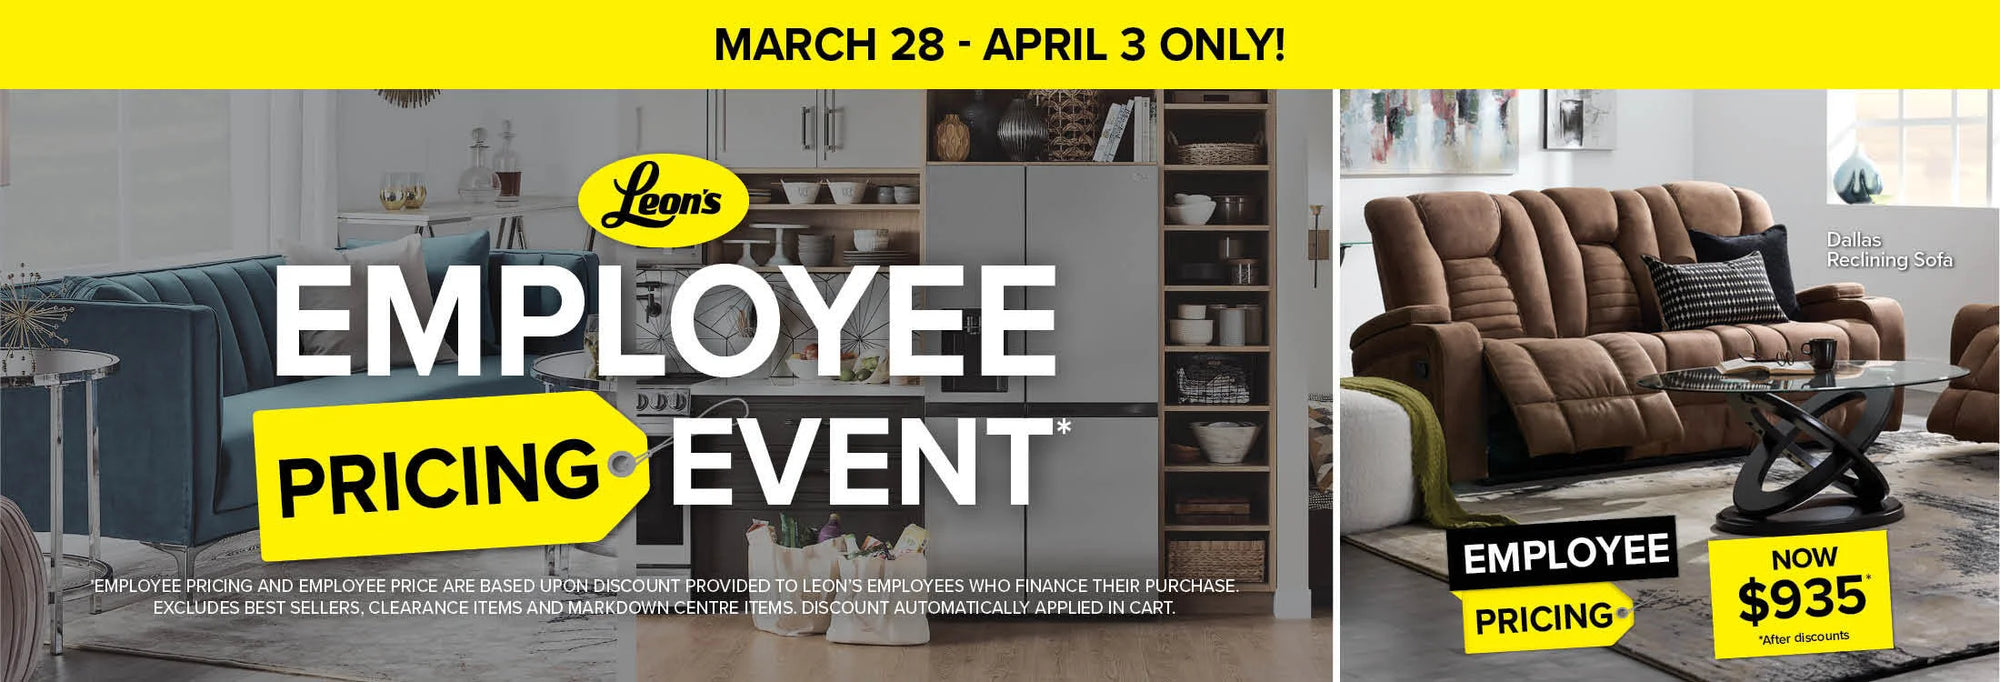 March 28-April 3 Only! Leon's Employee Pricing Event.